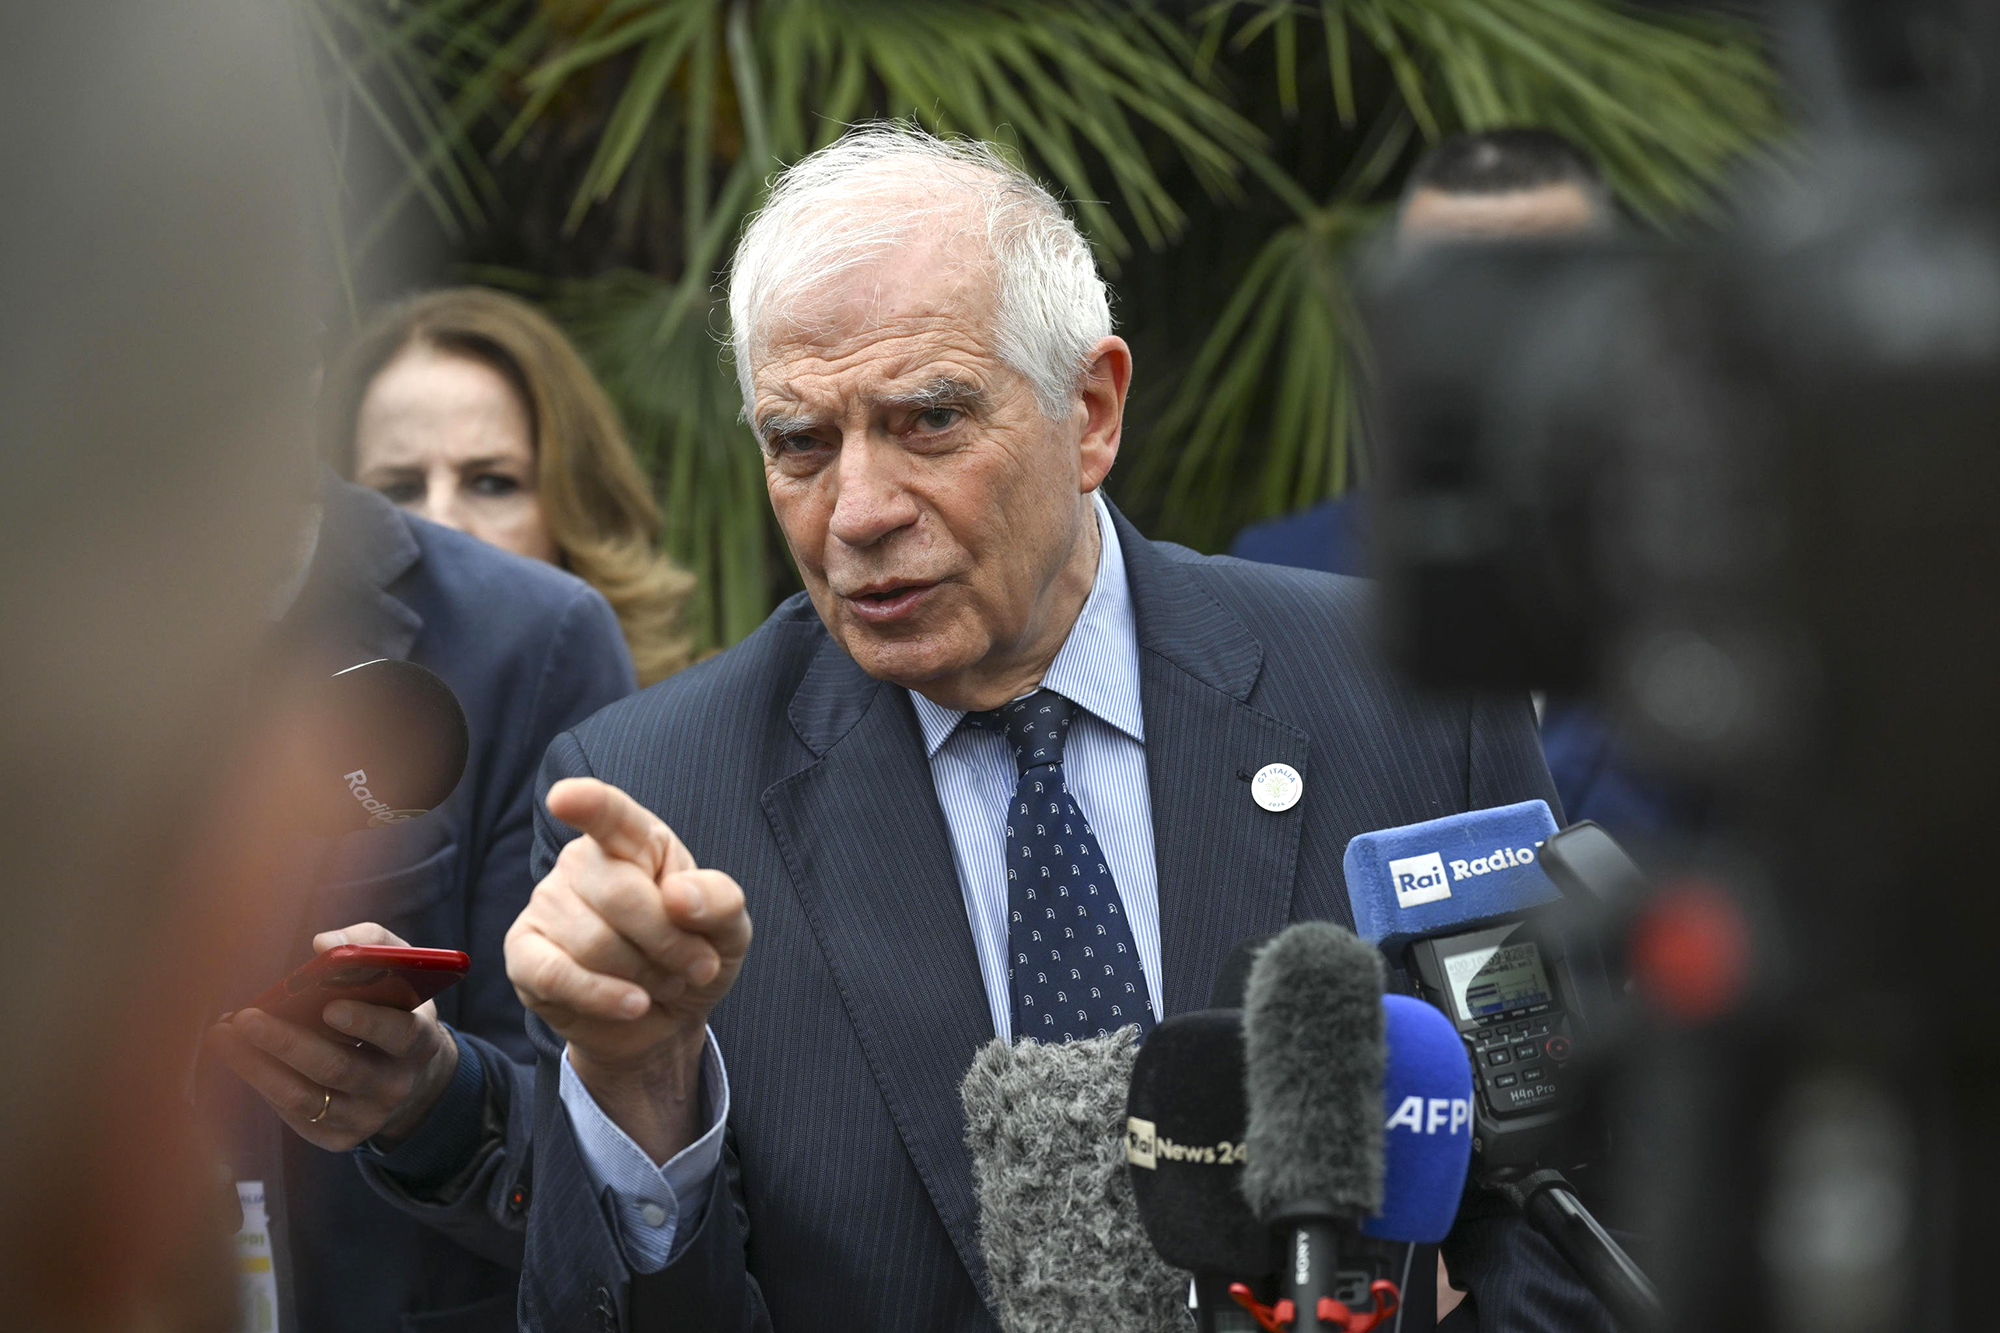 EU High Representative for Foreign Policy Josep Borrell speaks with journalists during the G7 Foreign Ministers' Meeting at Capri, Italy, on April 18.